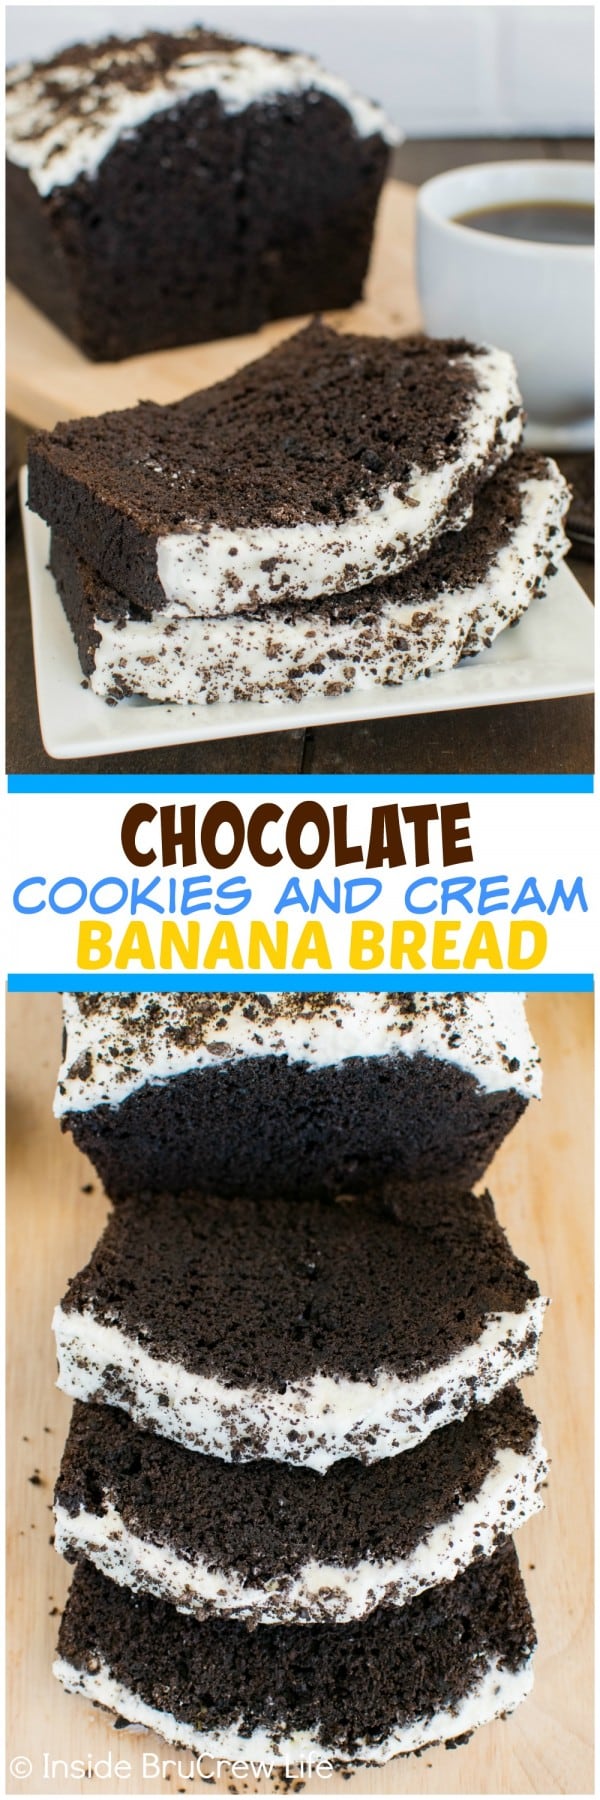 Chocolate Cookies and Cream Banana Bread - cookie chunks and frosting make this banana bread a fun and decadent breakfast recipe.